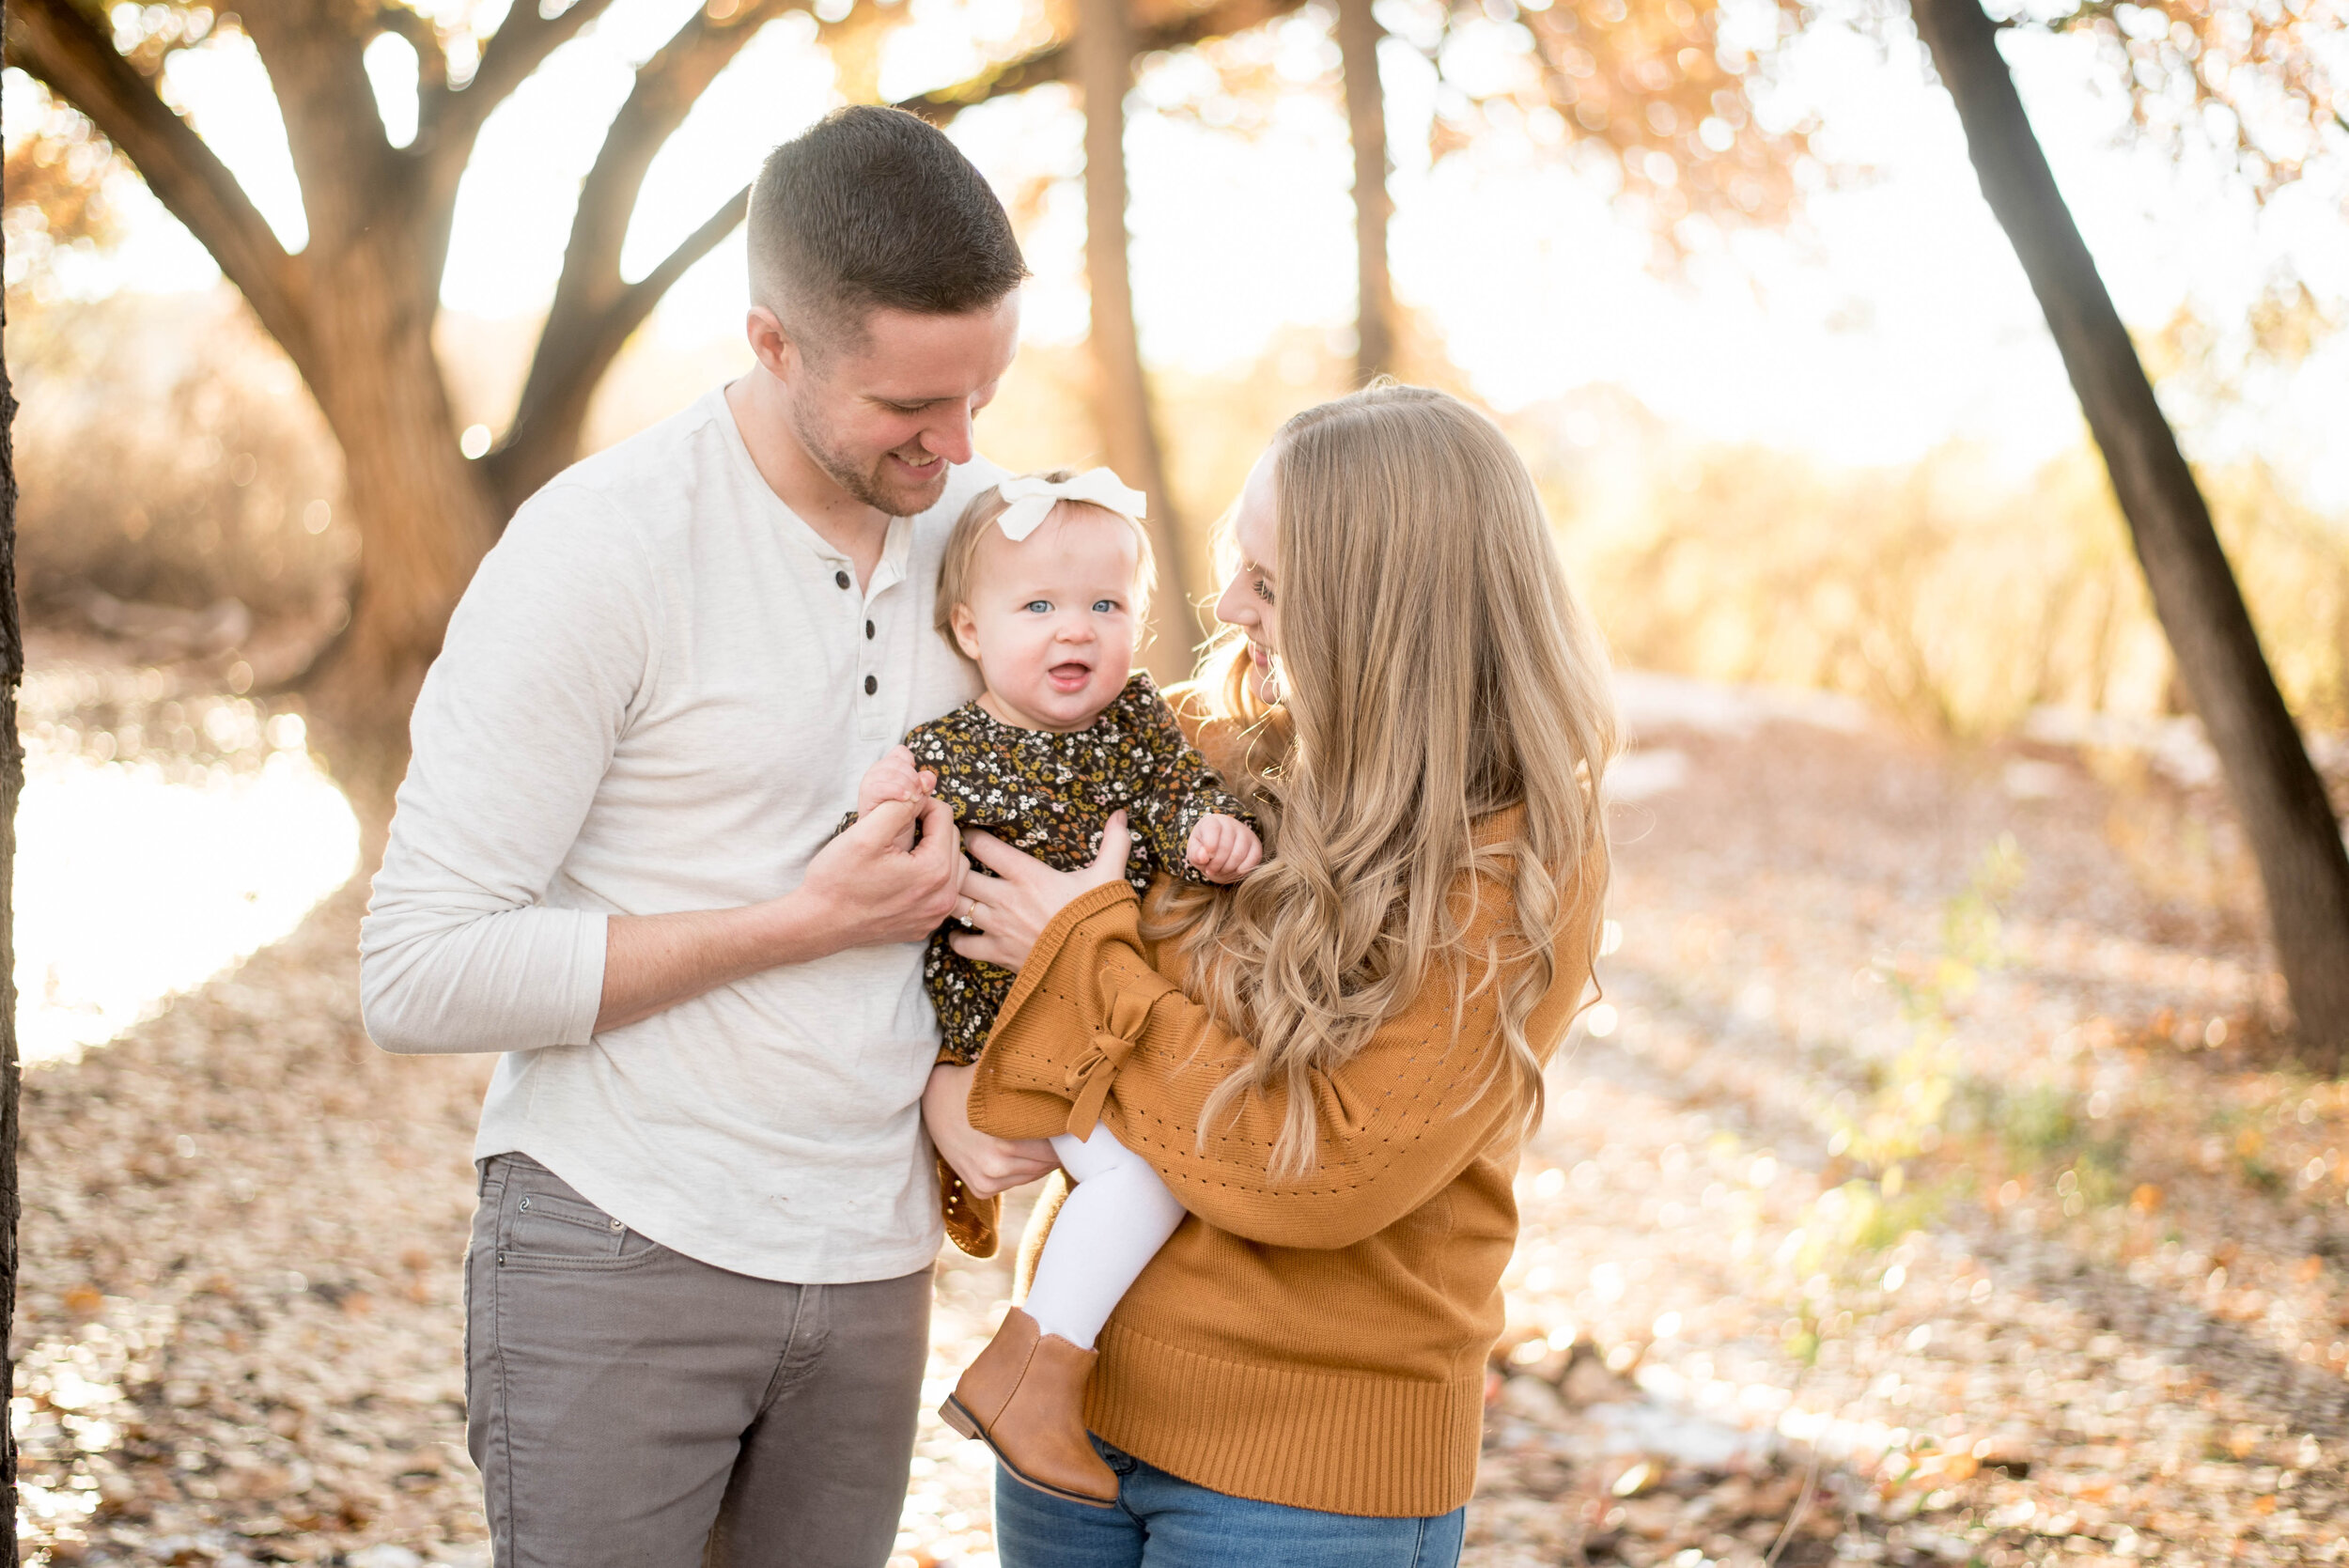 A Family Shoot in the Woods | Family photoshoot poses, Family picture poses,  Family photo pose